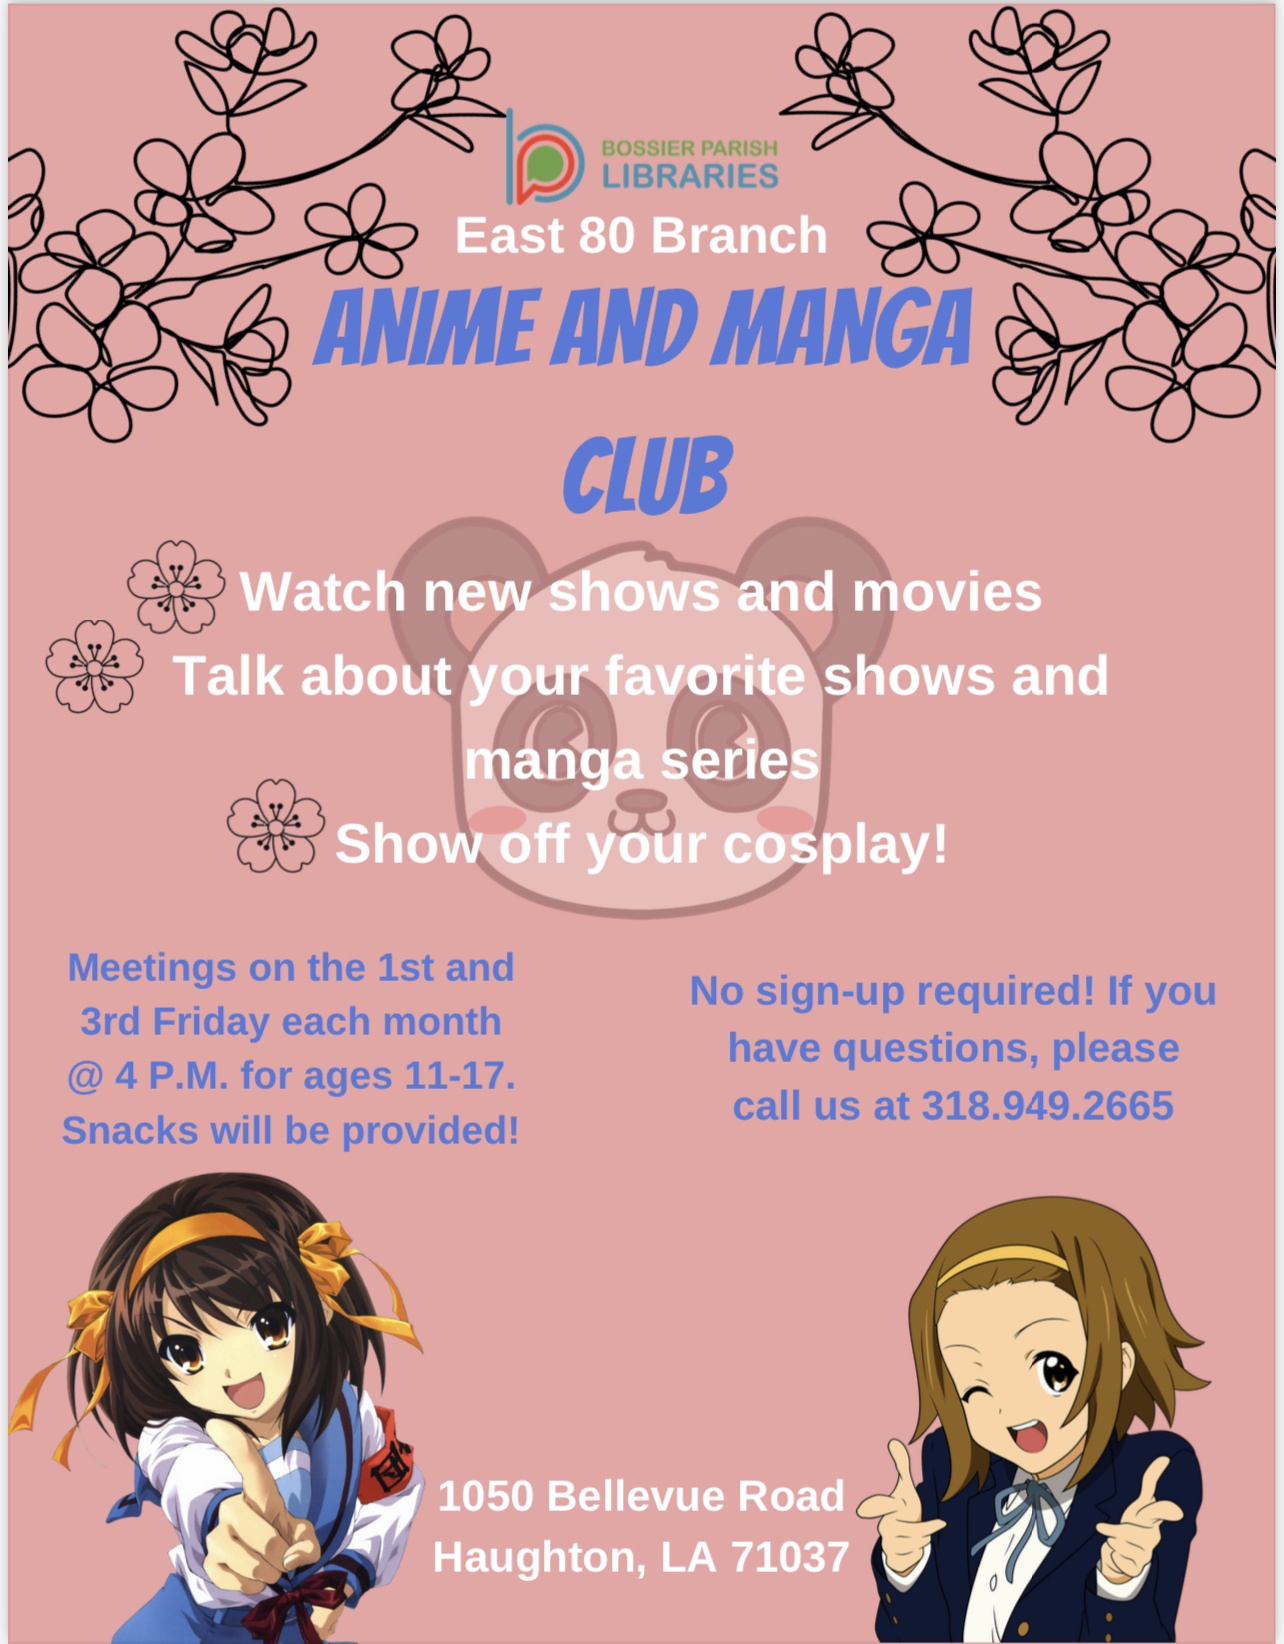 Anime Club flyer-Updated JanFeb 2018 - Yakima Valley Libraries